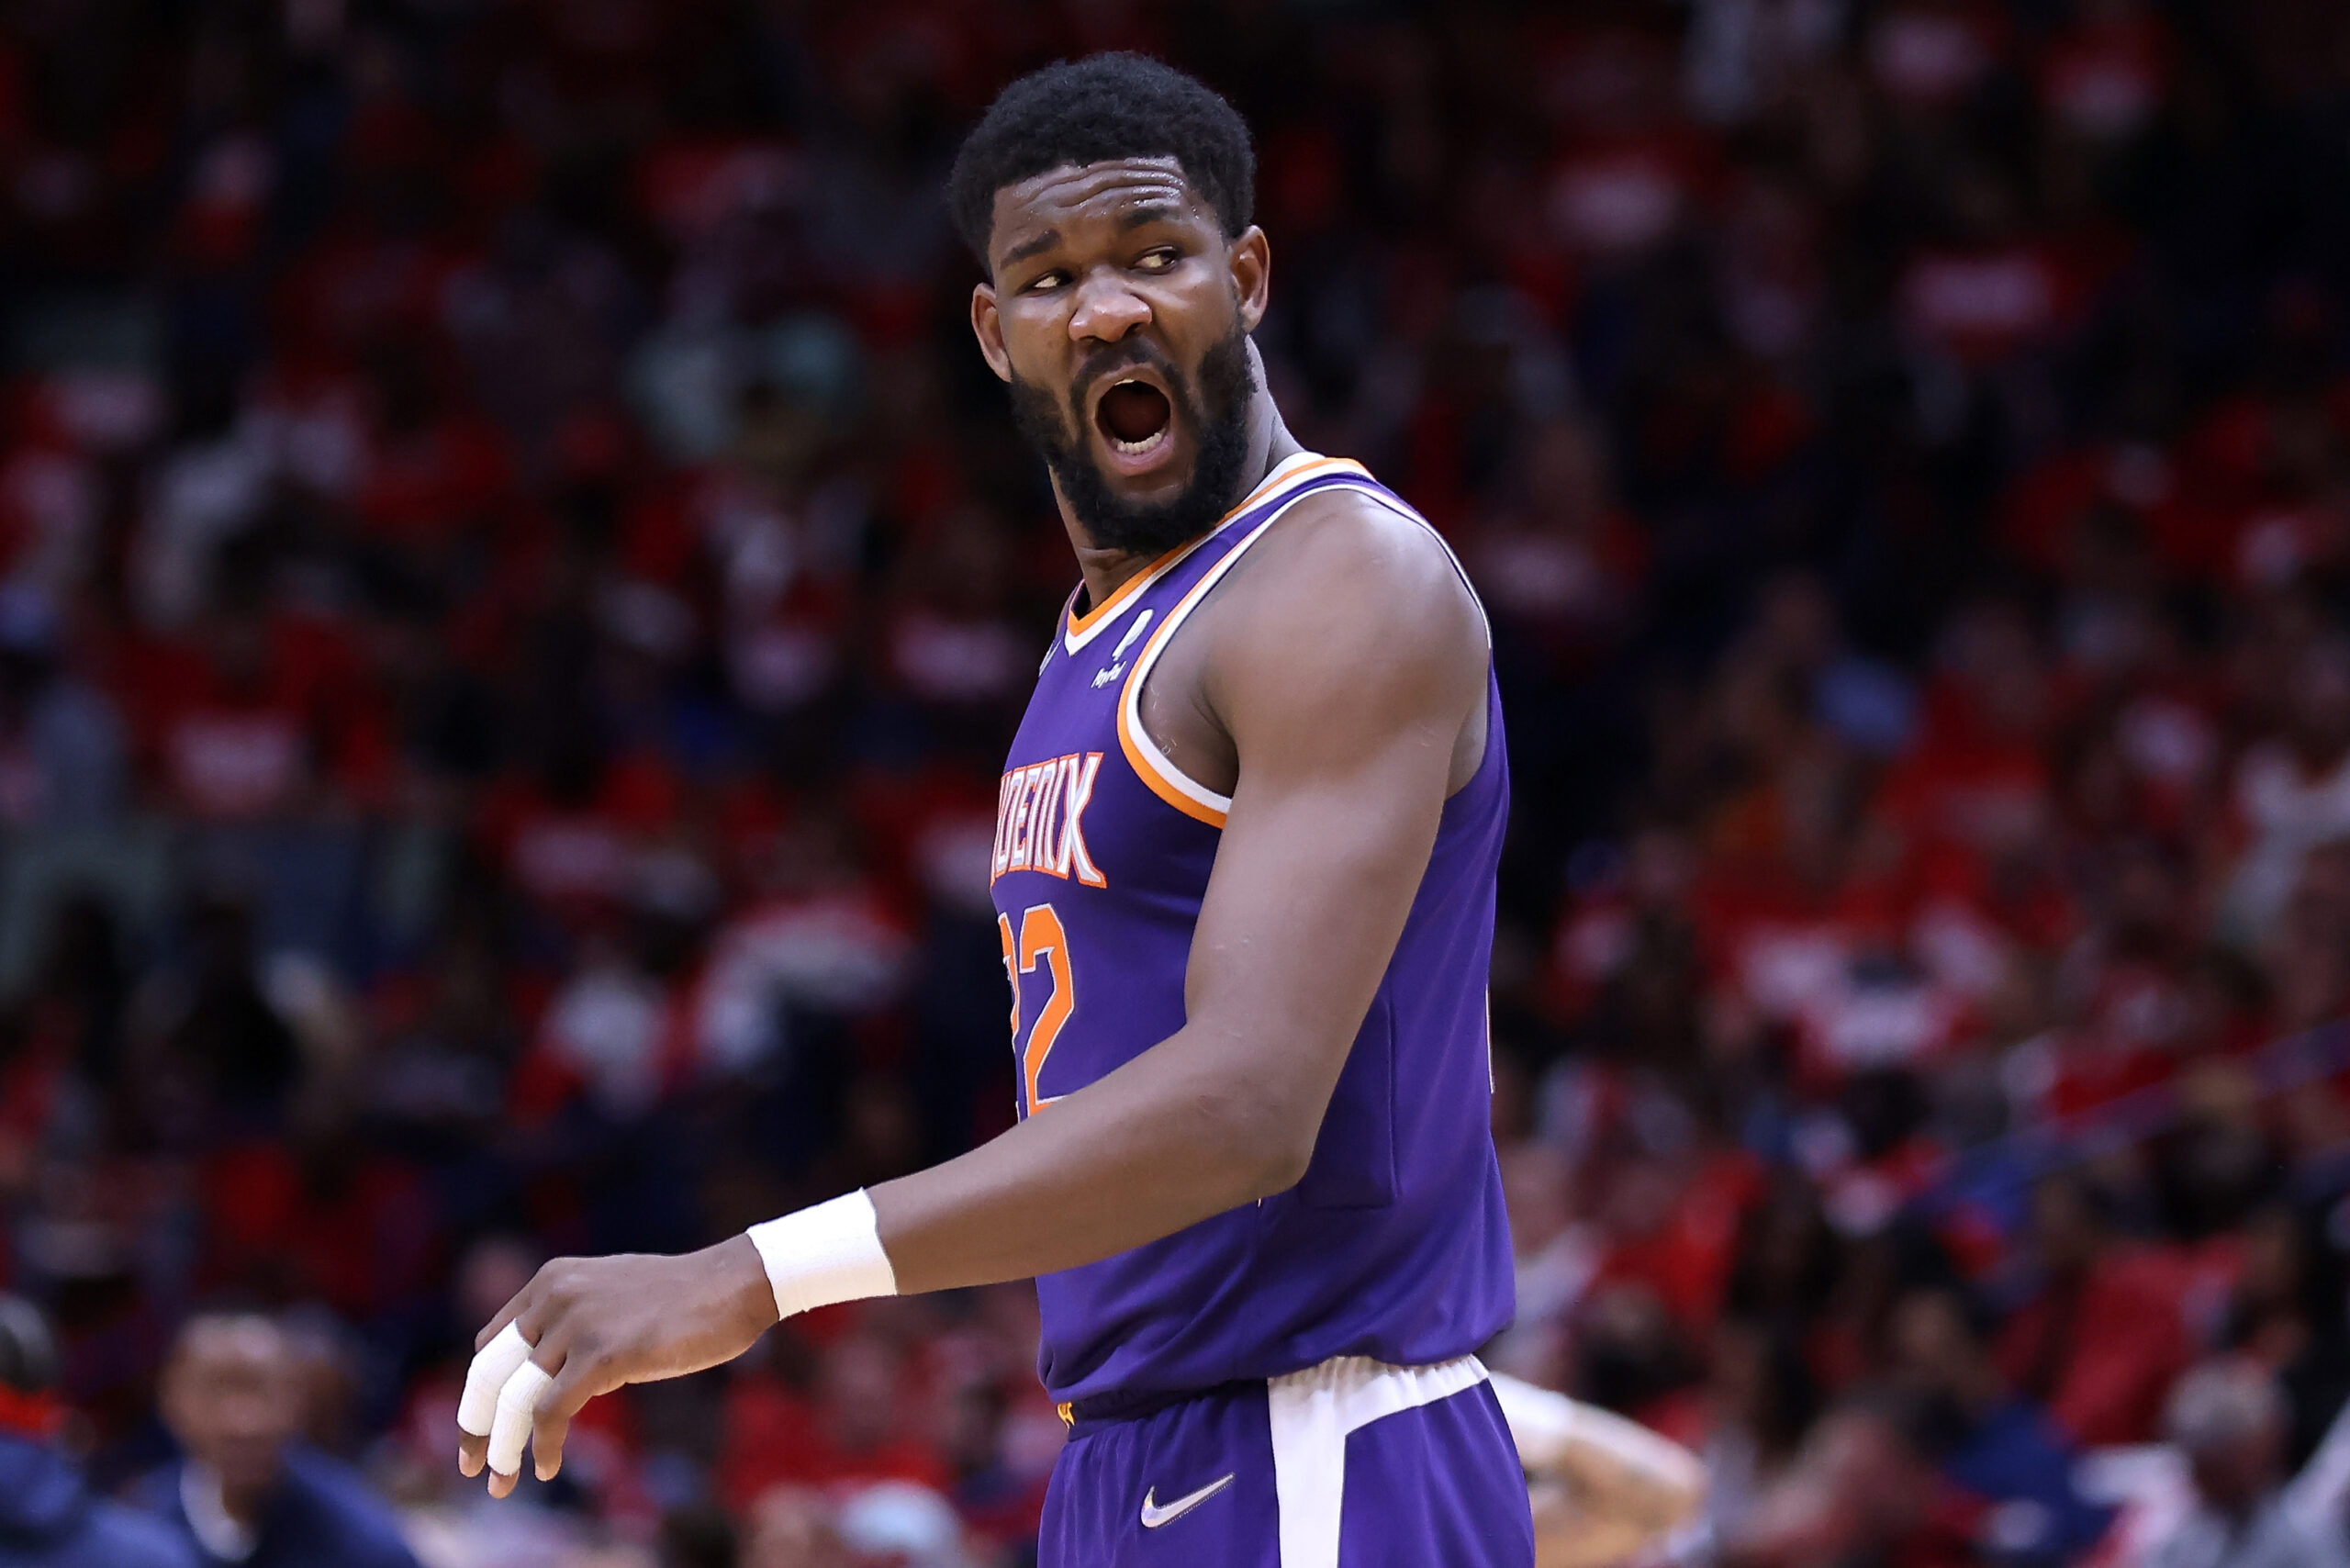 Deandre Ayton, Suns' Deandre Ayton Trade To The Blazers In Bold Proposal